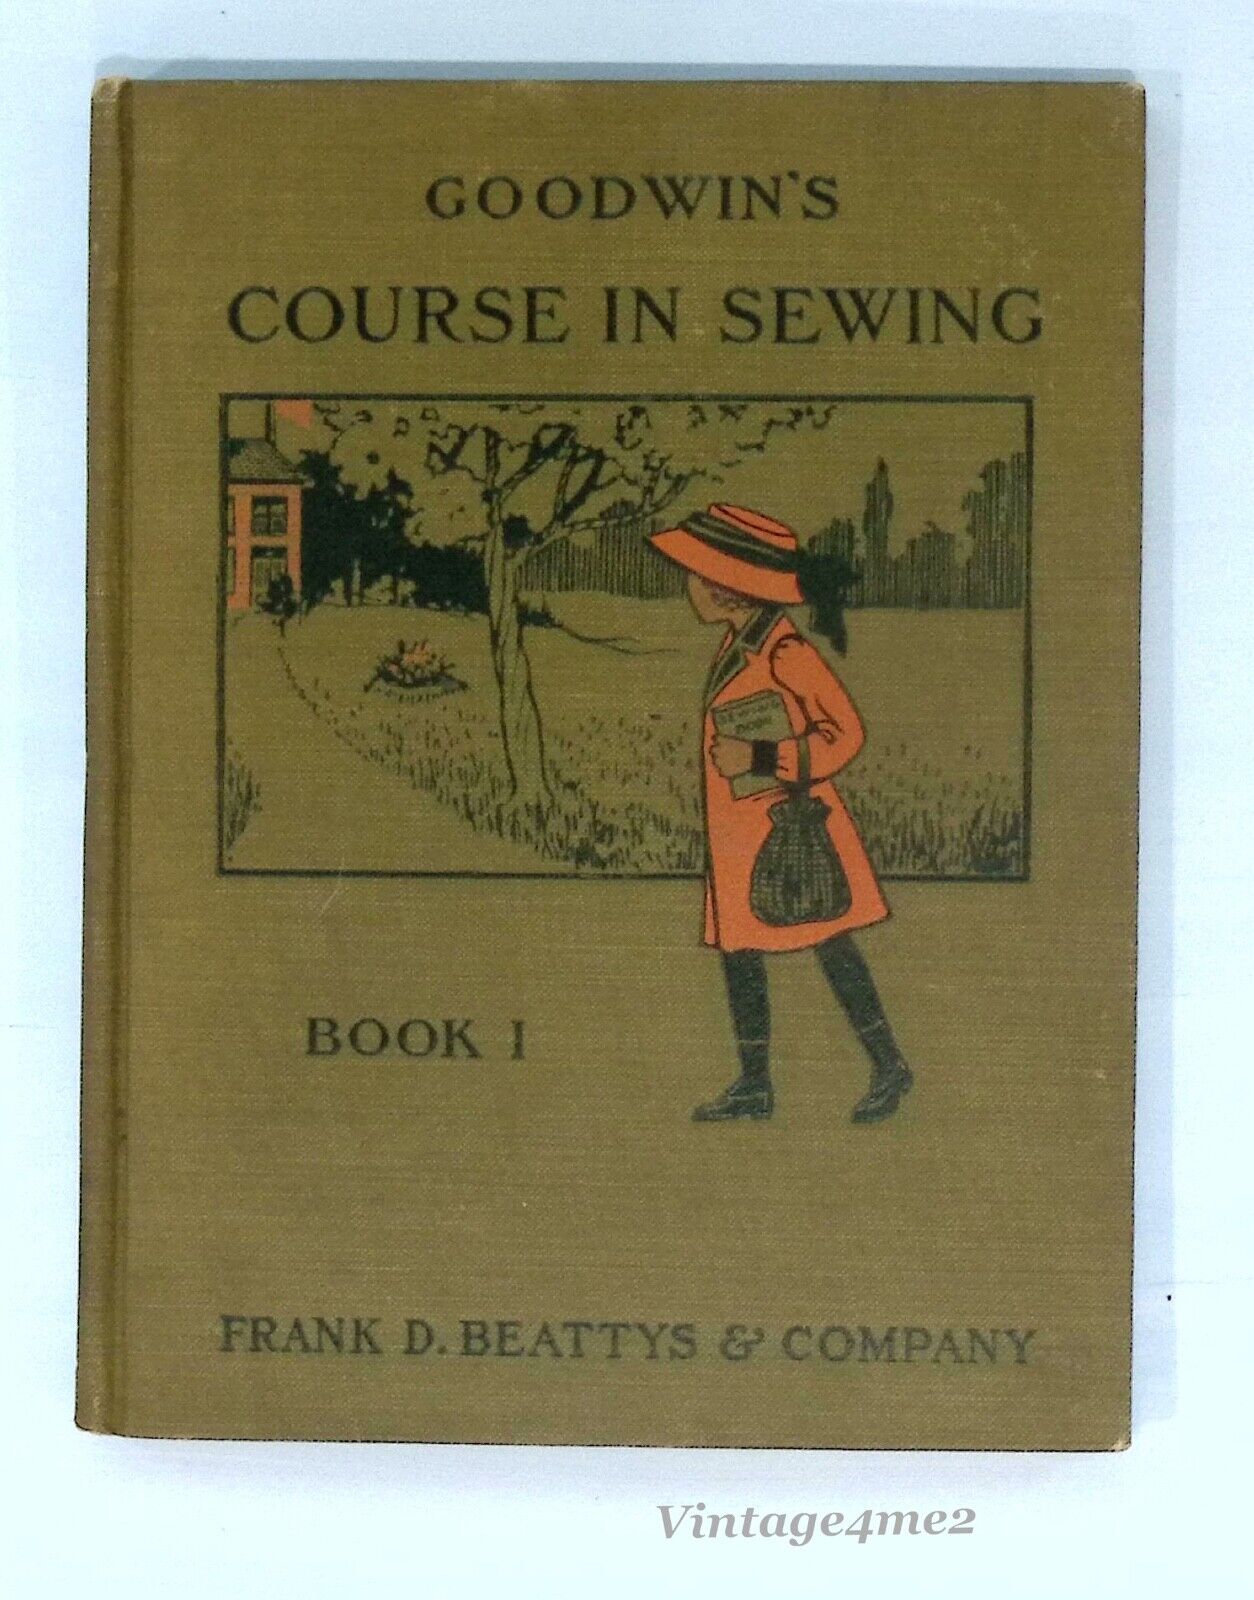 1910 Goodwin's Course in Sewing Book 1 Includes Old World  Learn To Sew Projects